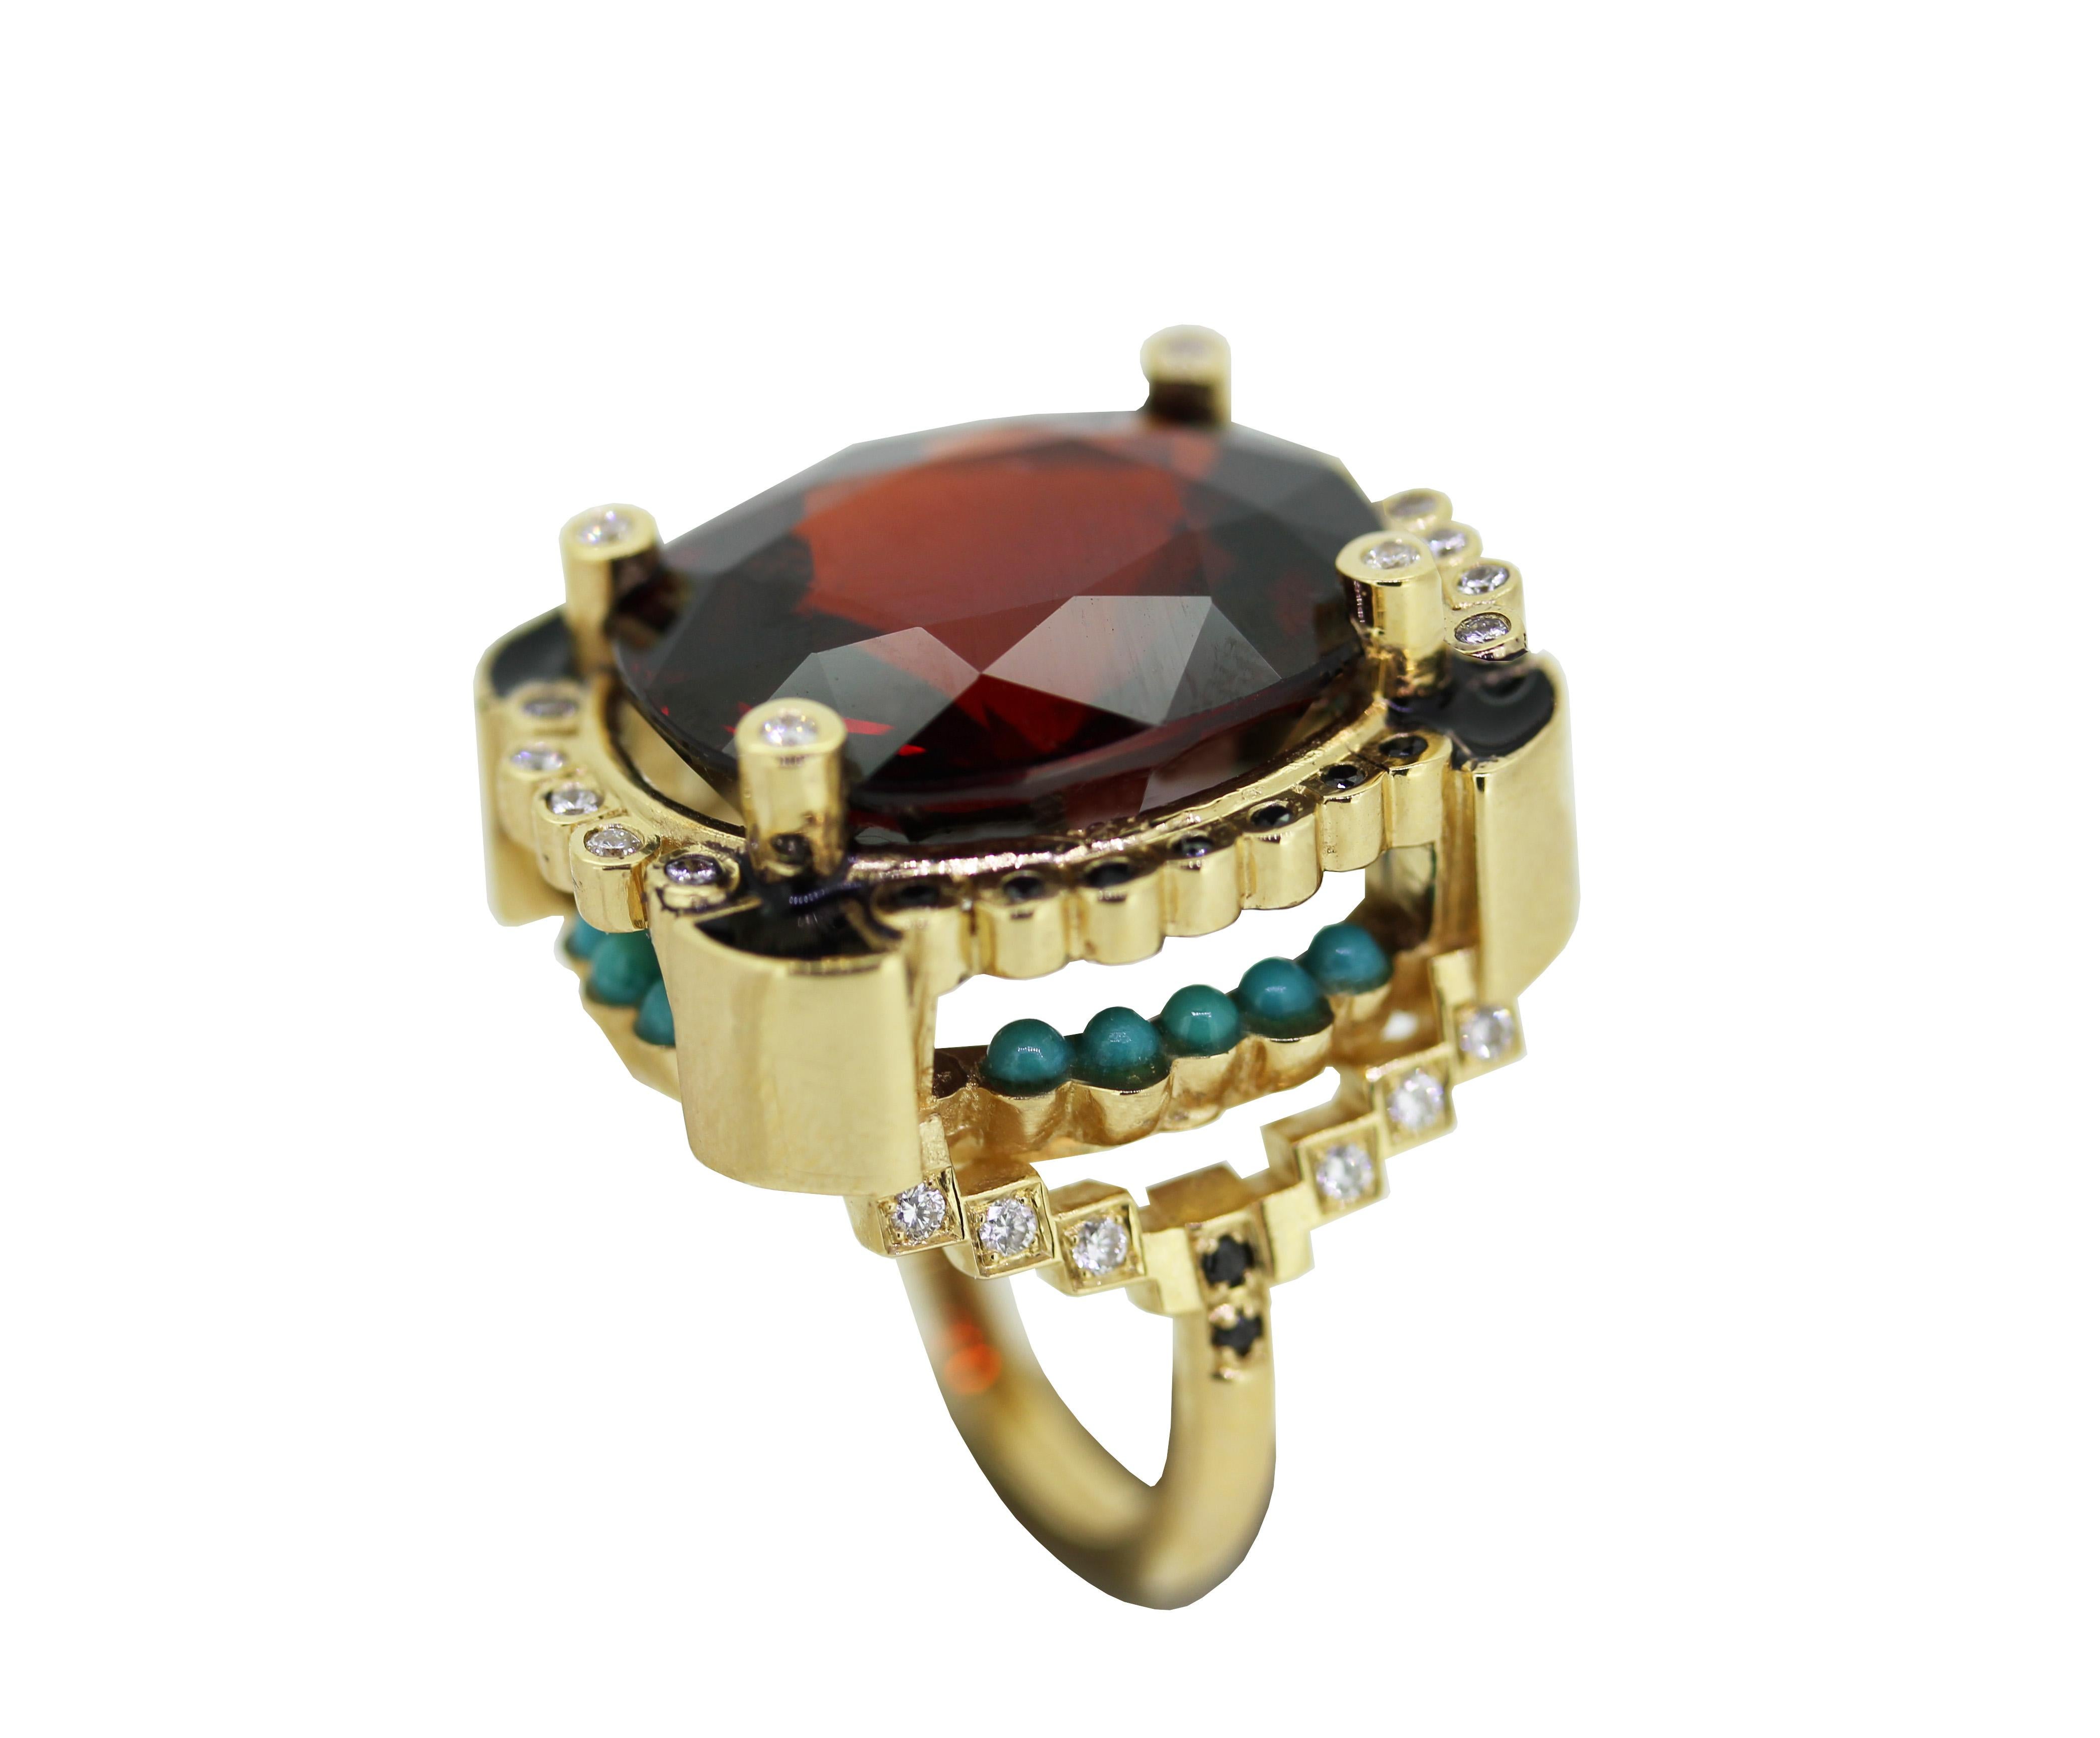 This modern handmade British-London Hallmarked 18 karat yellow gold ring, set with highest quality of diamonds and 20 carat of rare vivid red color natural garnet and black enamel is from MAIKO NAGAYAMA's Haute Couture Collection called